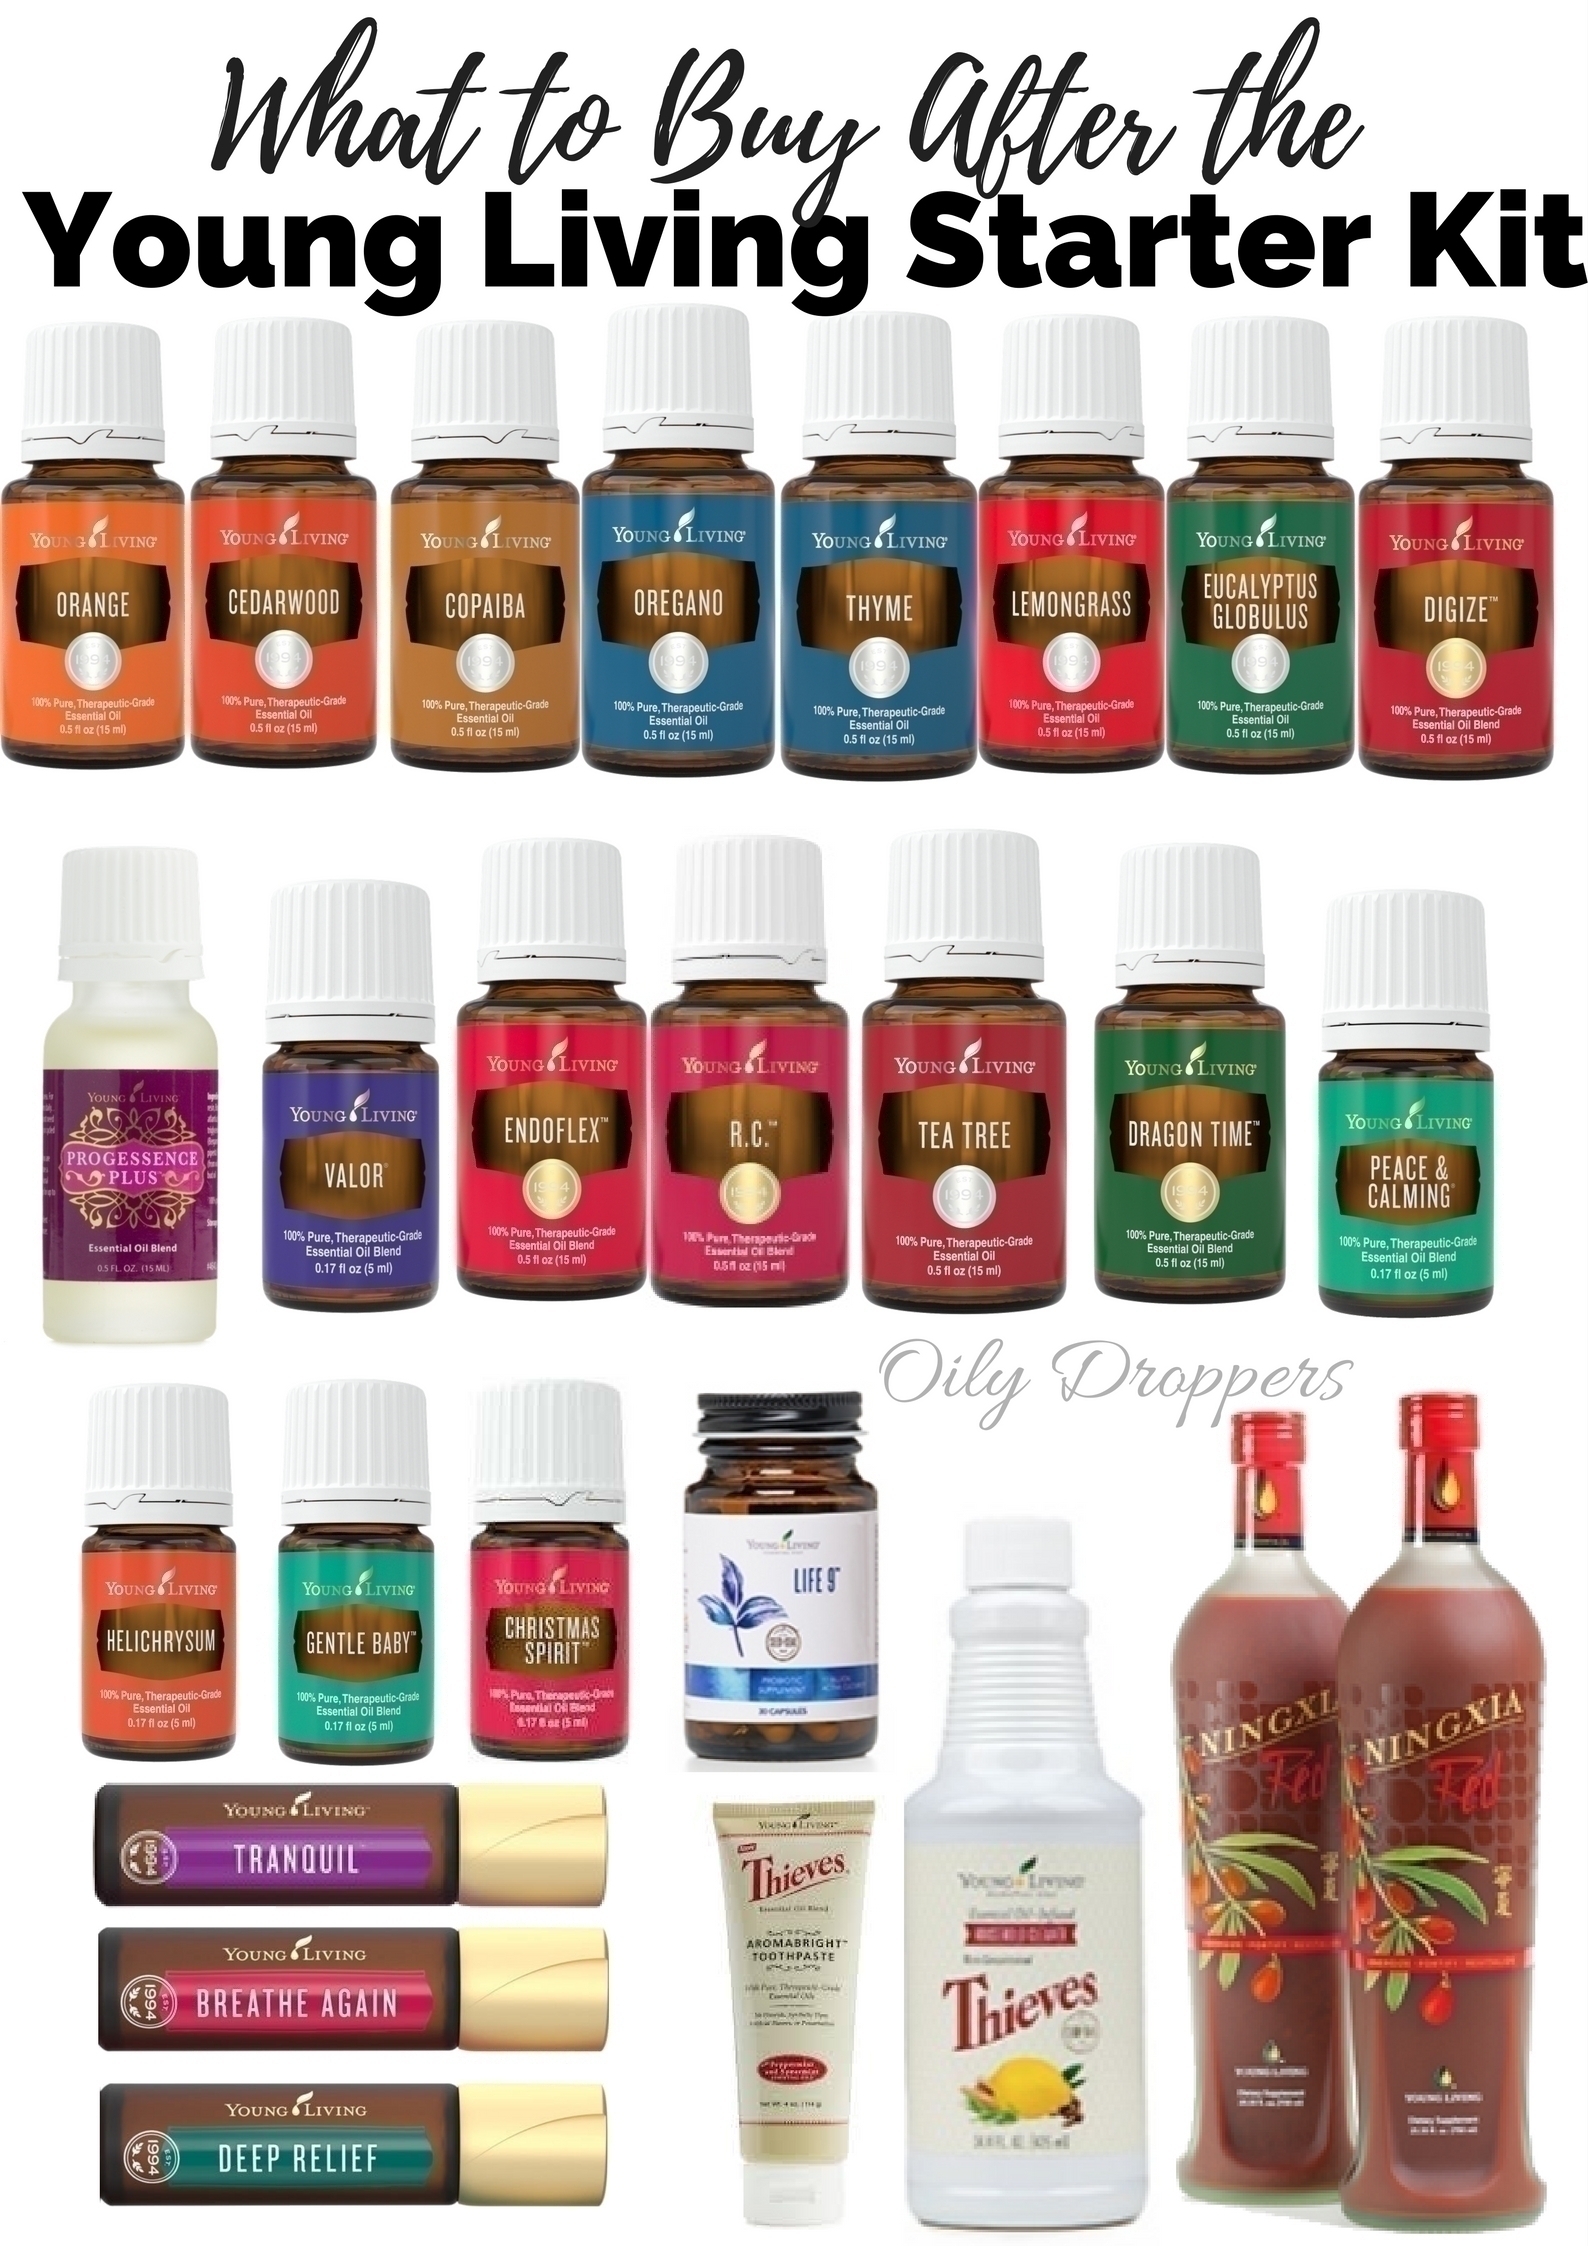 The Young Living Premium Starter Kit is one of the BEST investments you could ever make in your health. But what do you buy beyond that? Here are 25 essentials that you should think about after you buy the Young Living Premium Starter Kit.